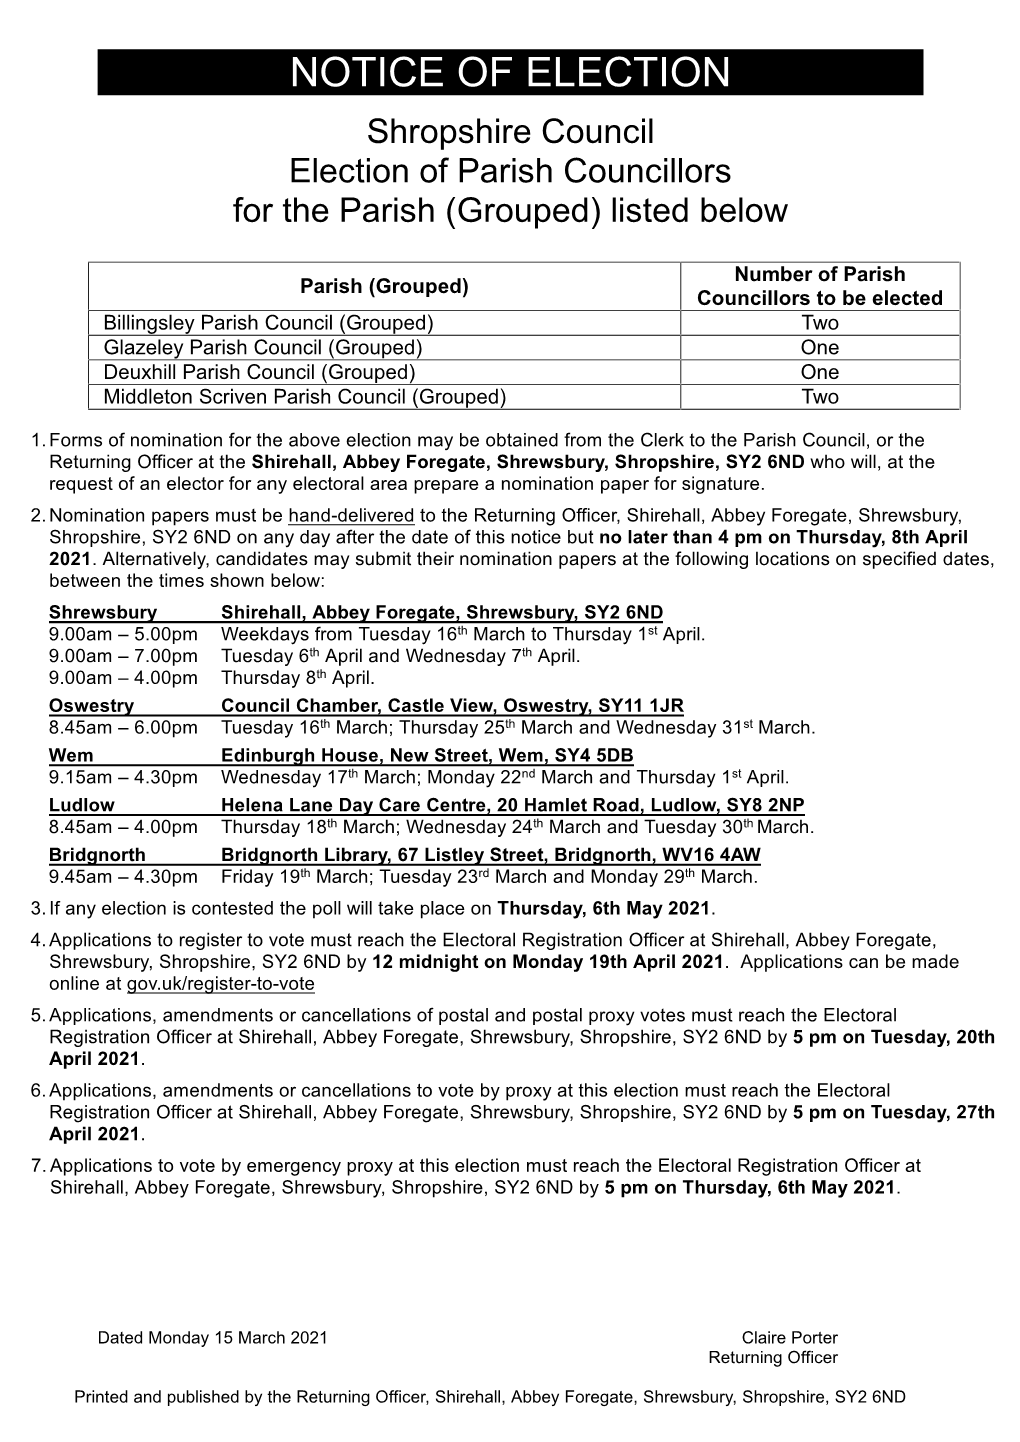 NOTICE of ELECTION Shropshire Council Election of Parish Councillors for the Parish (Grouped) Listed Below